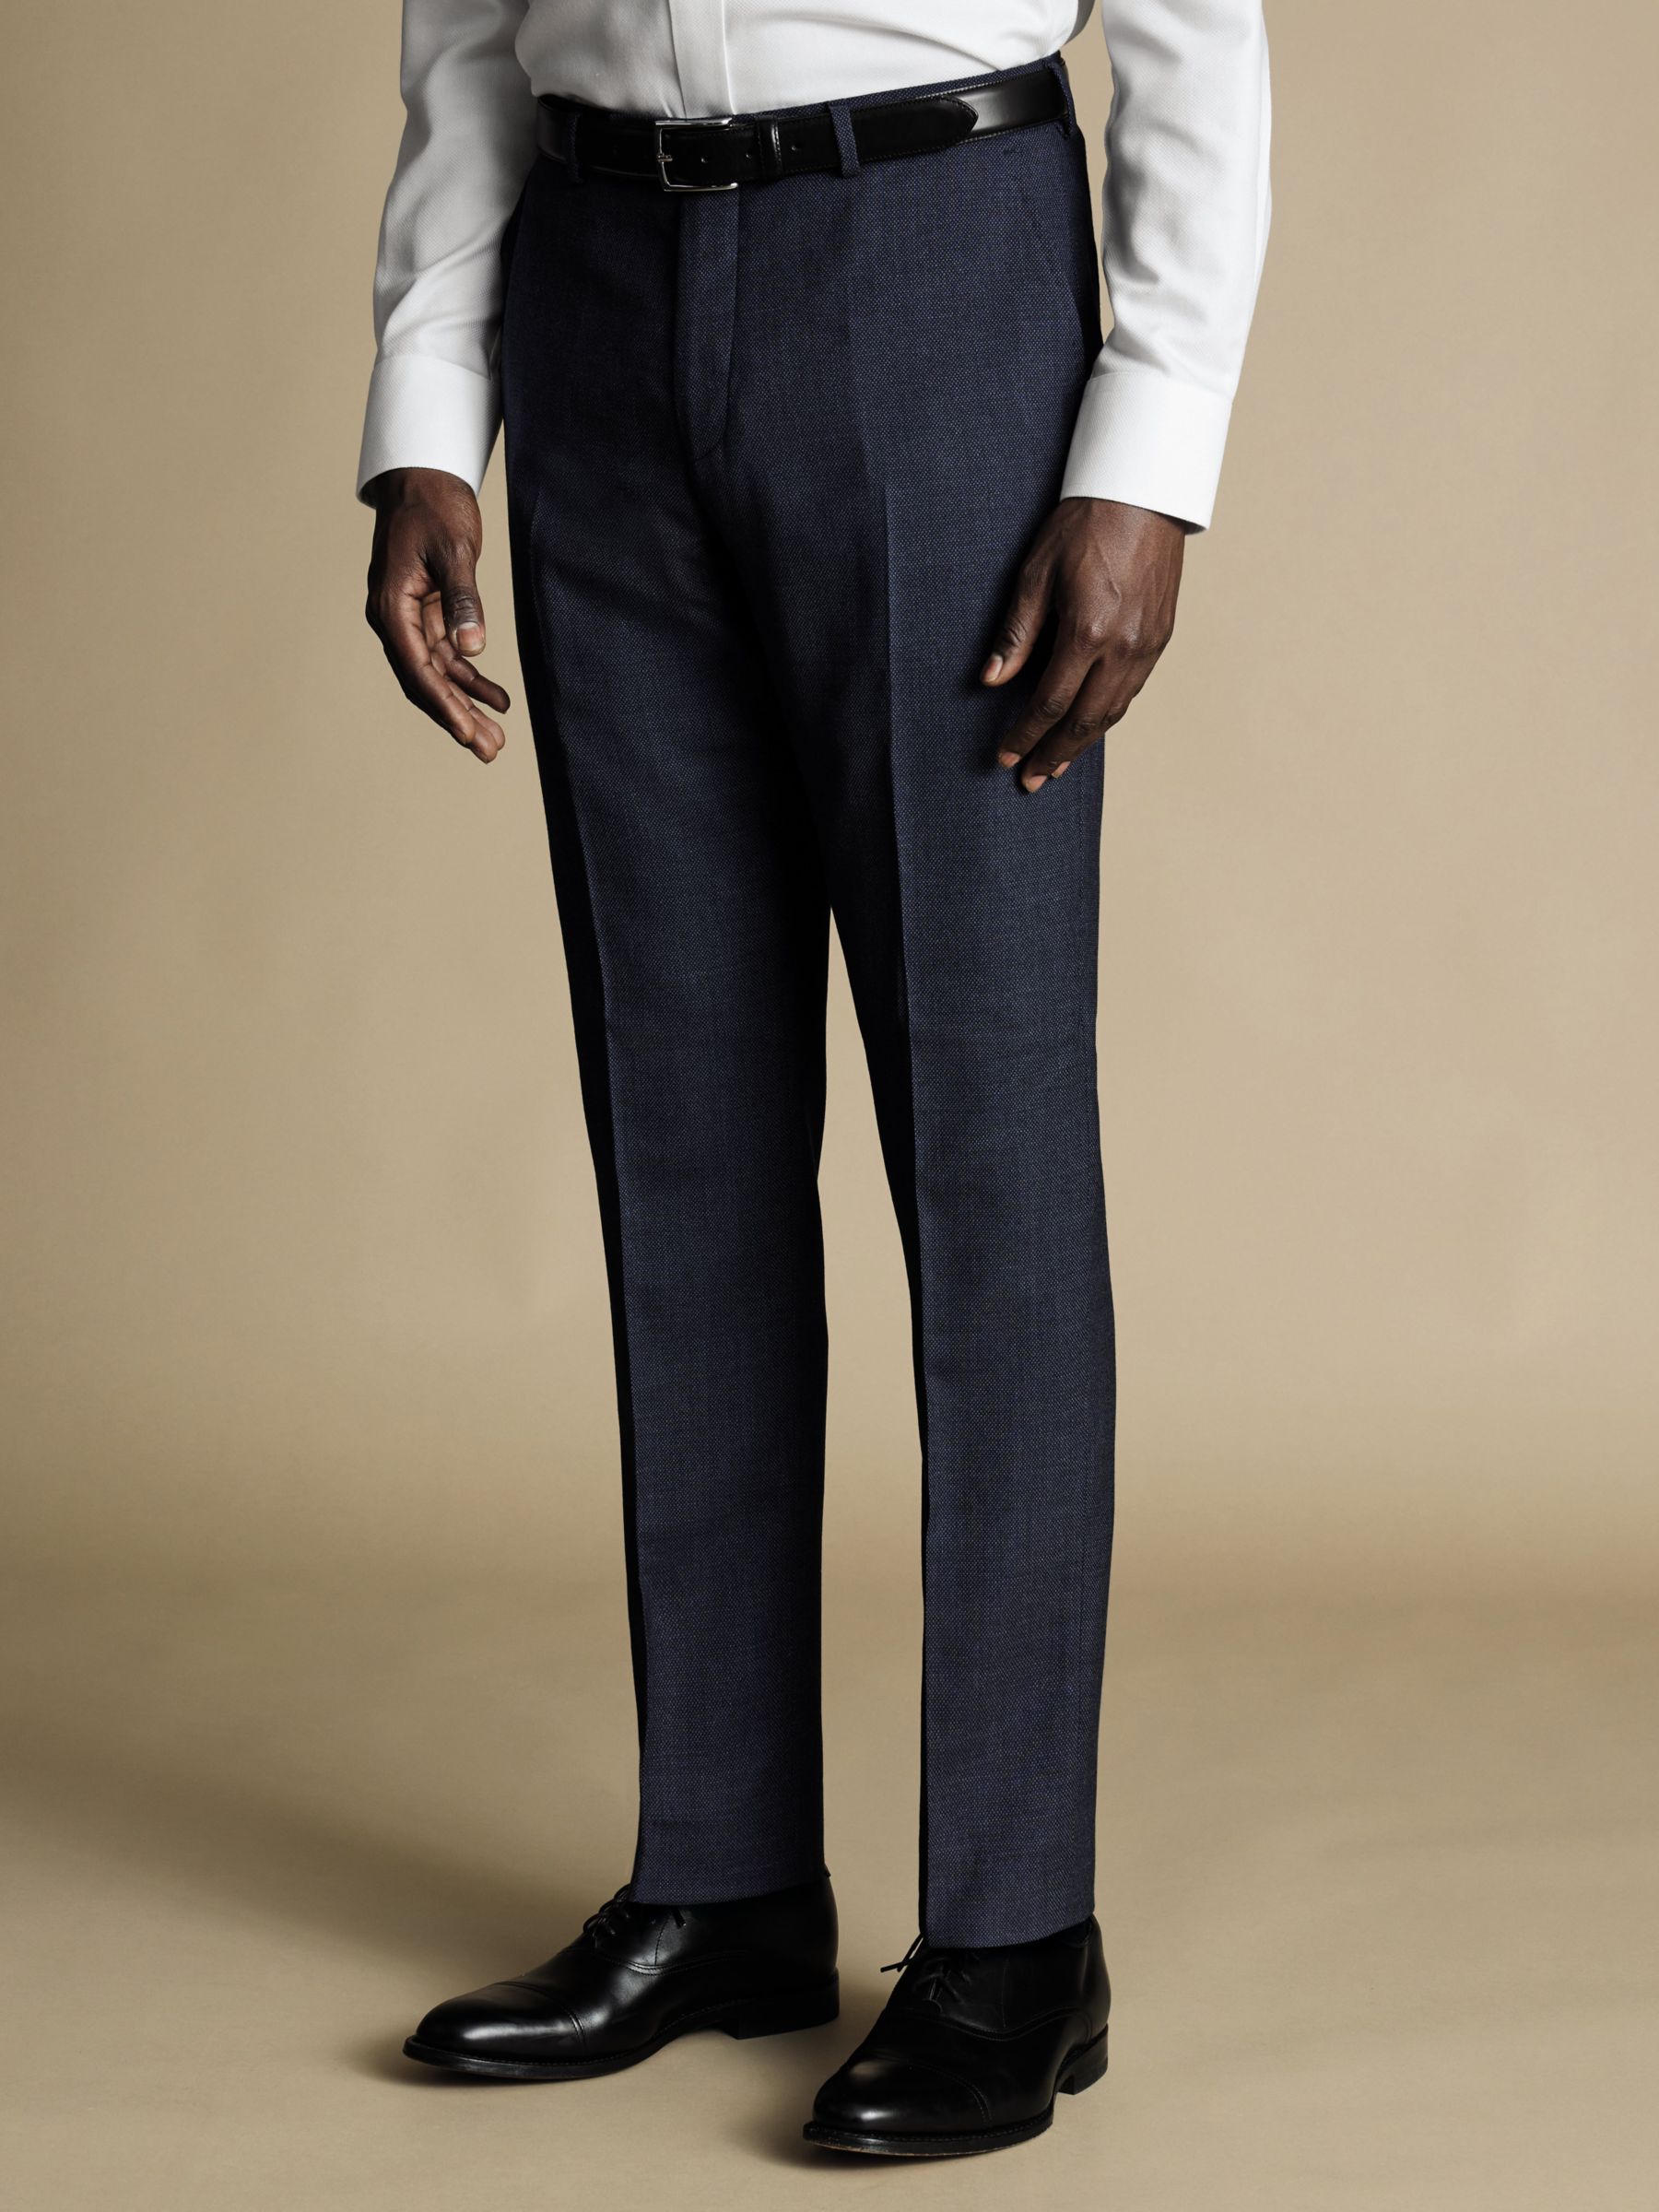 Buy Charles Tyrwhitt Prince of Wales Slim Fit Suit Trousers, Navy Online at johnlewis.com